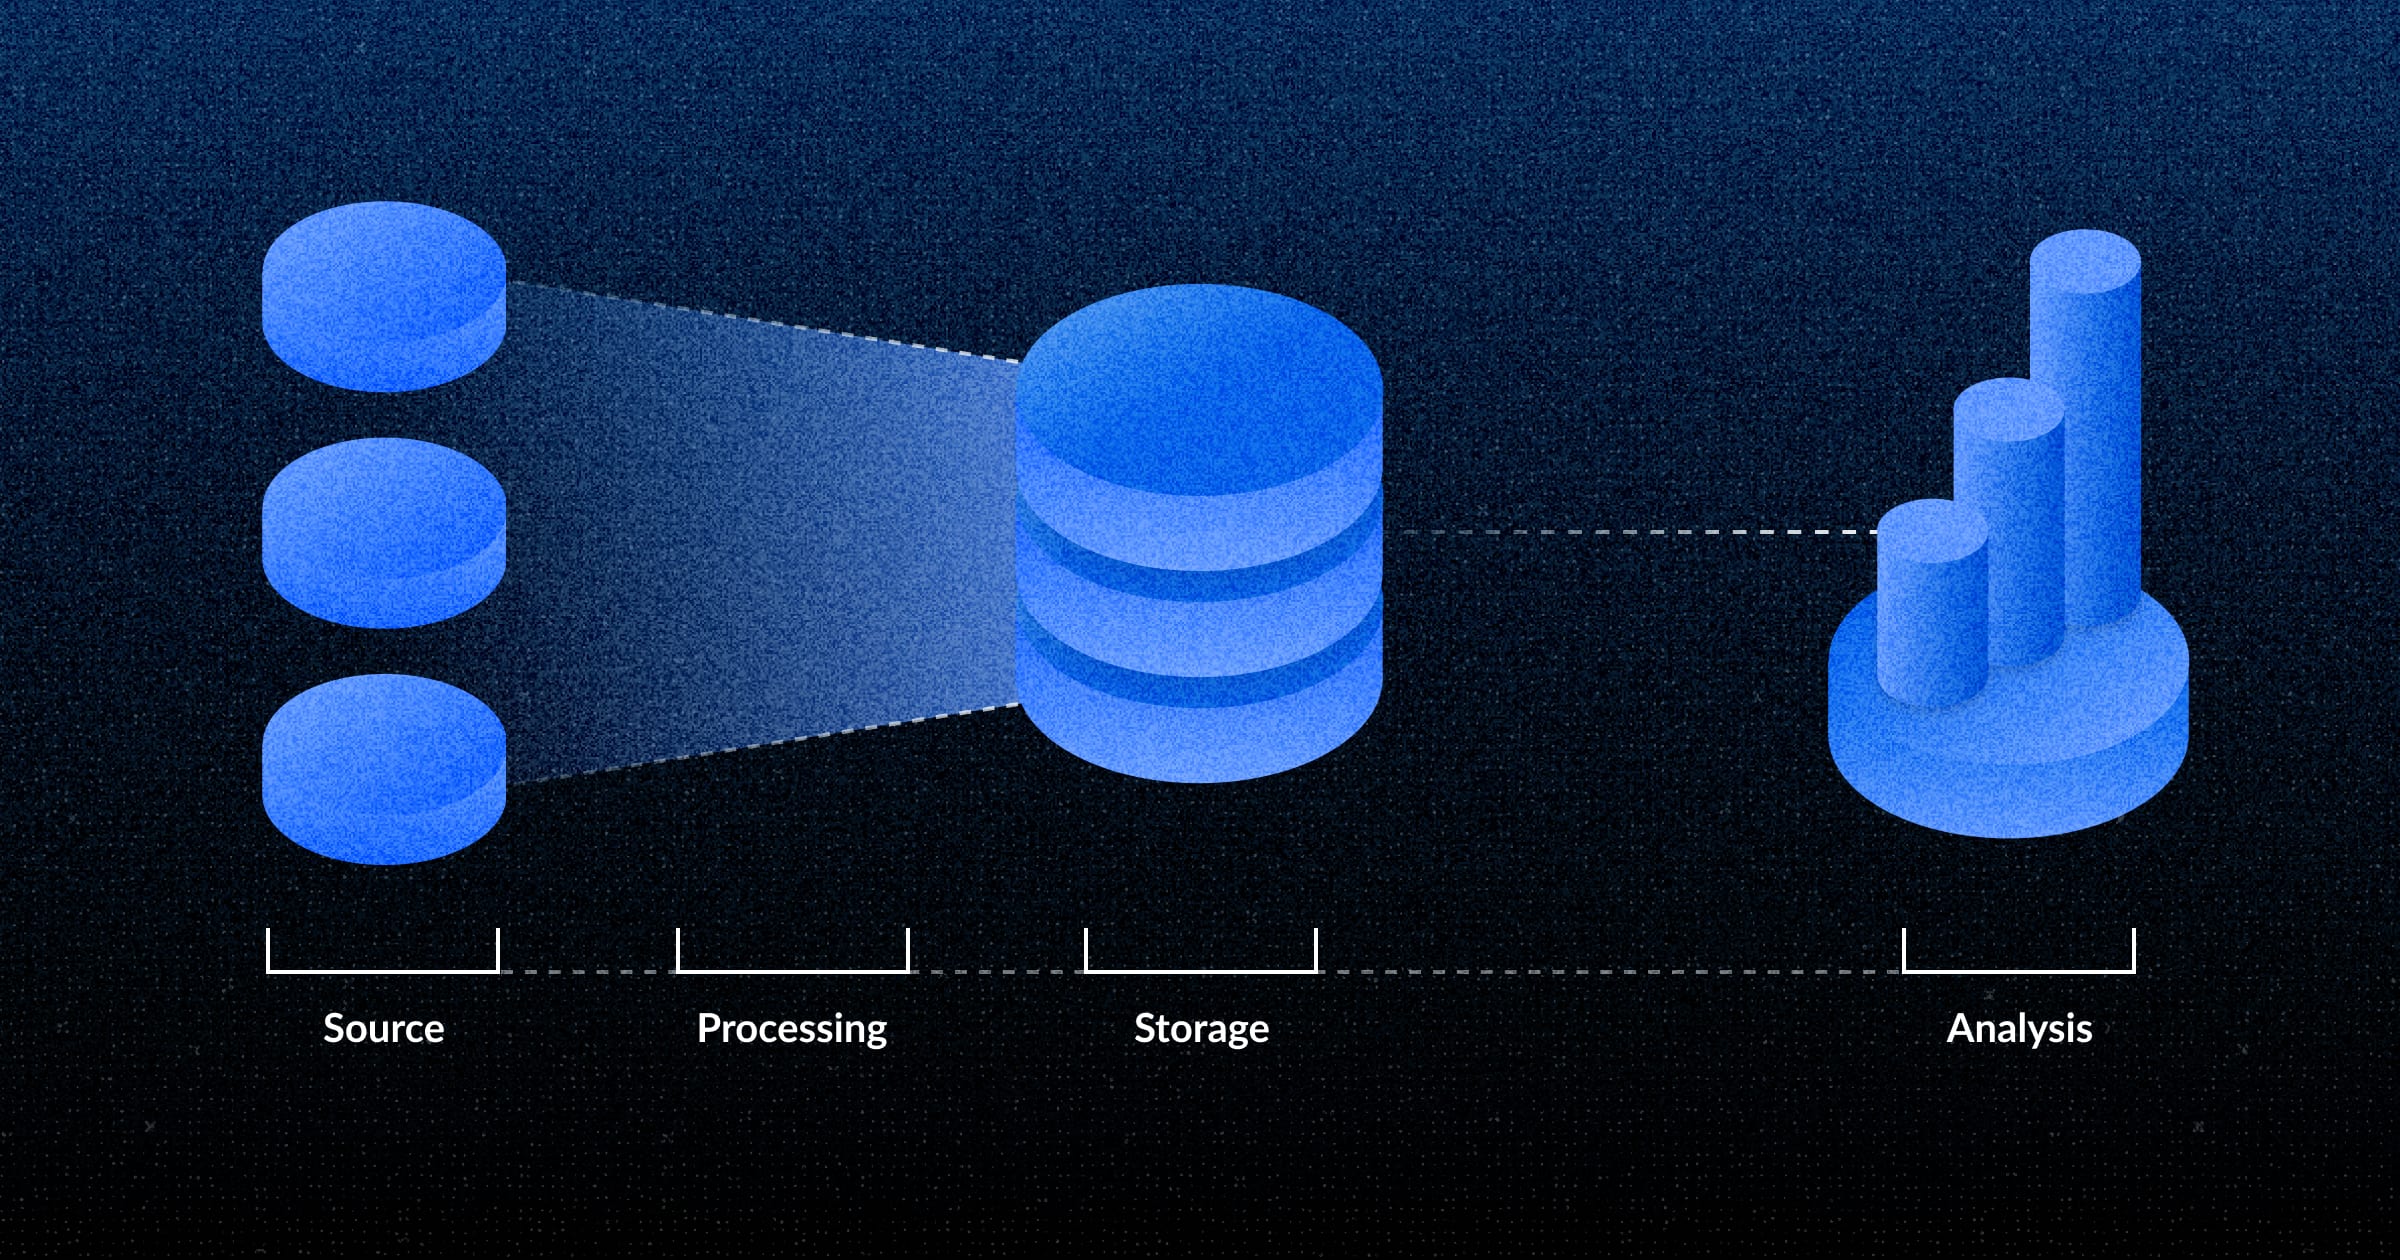 The basic layers of a modern data stack.